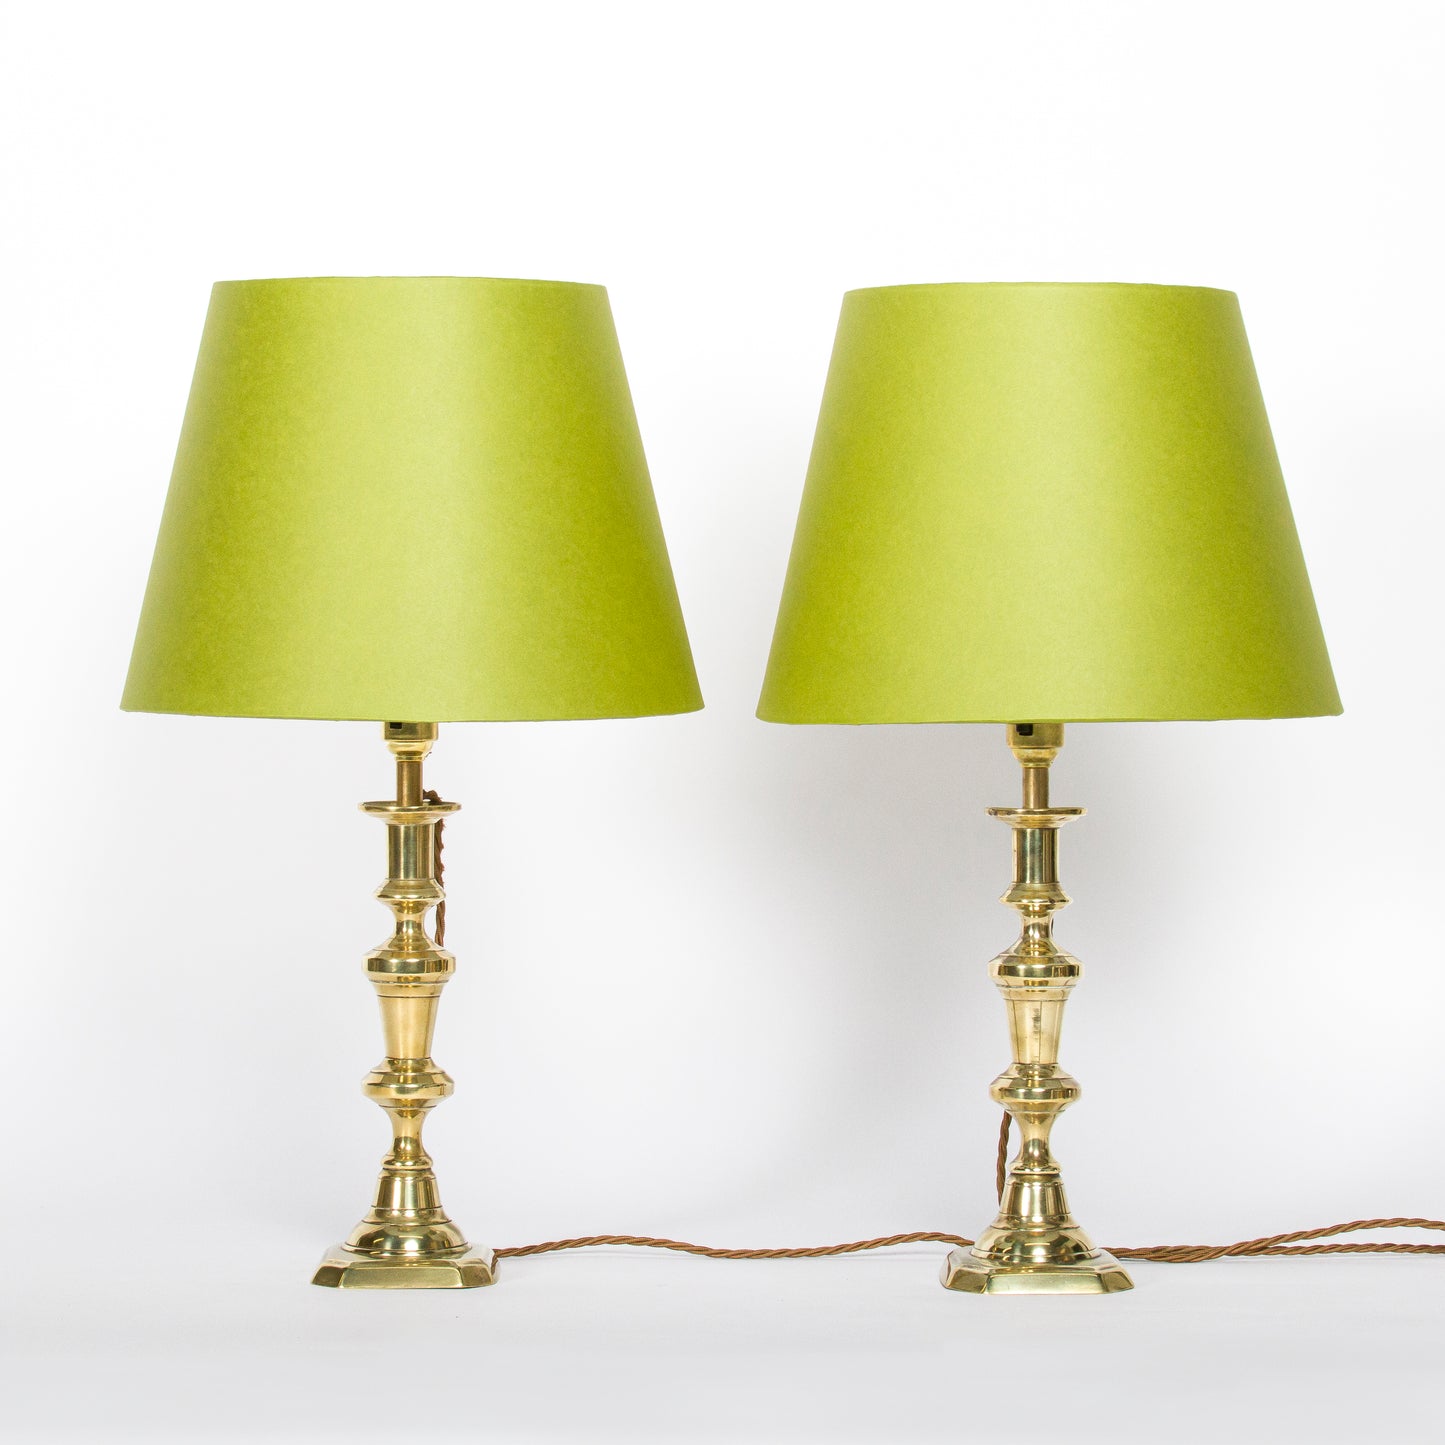 A pair of brass candlesticks converted to lamps, circa 1850